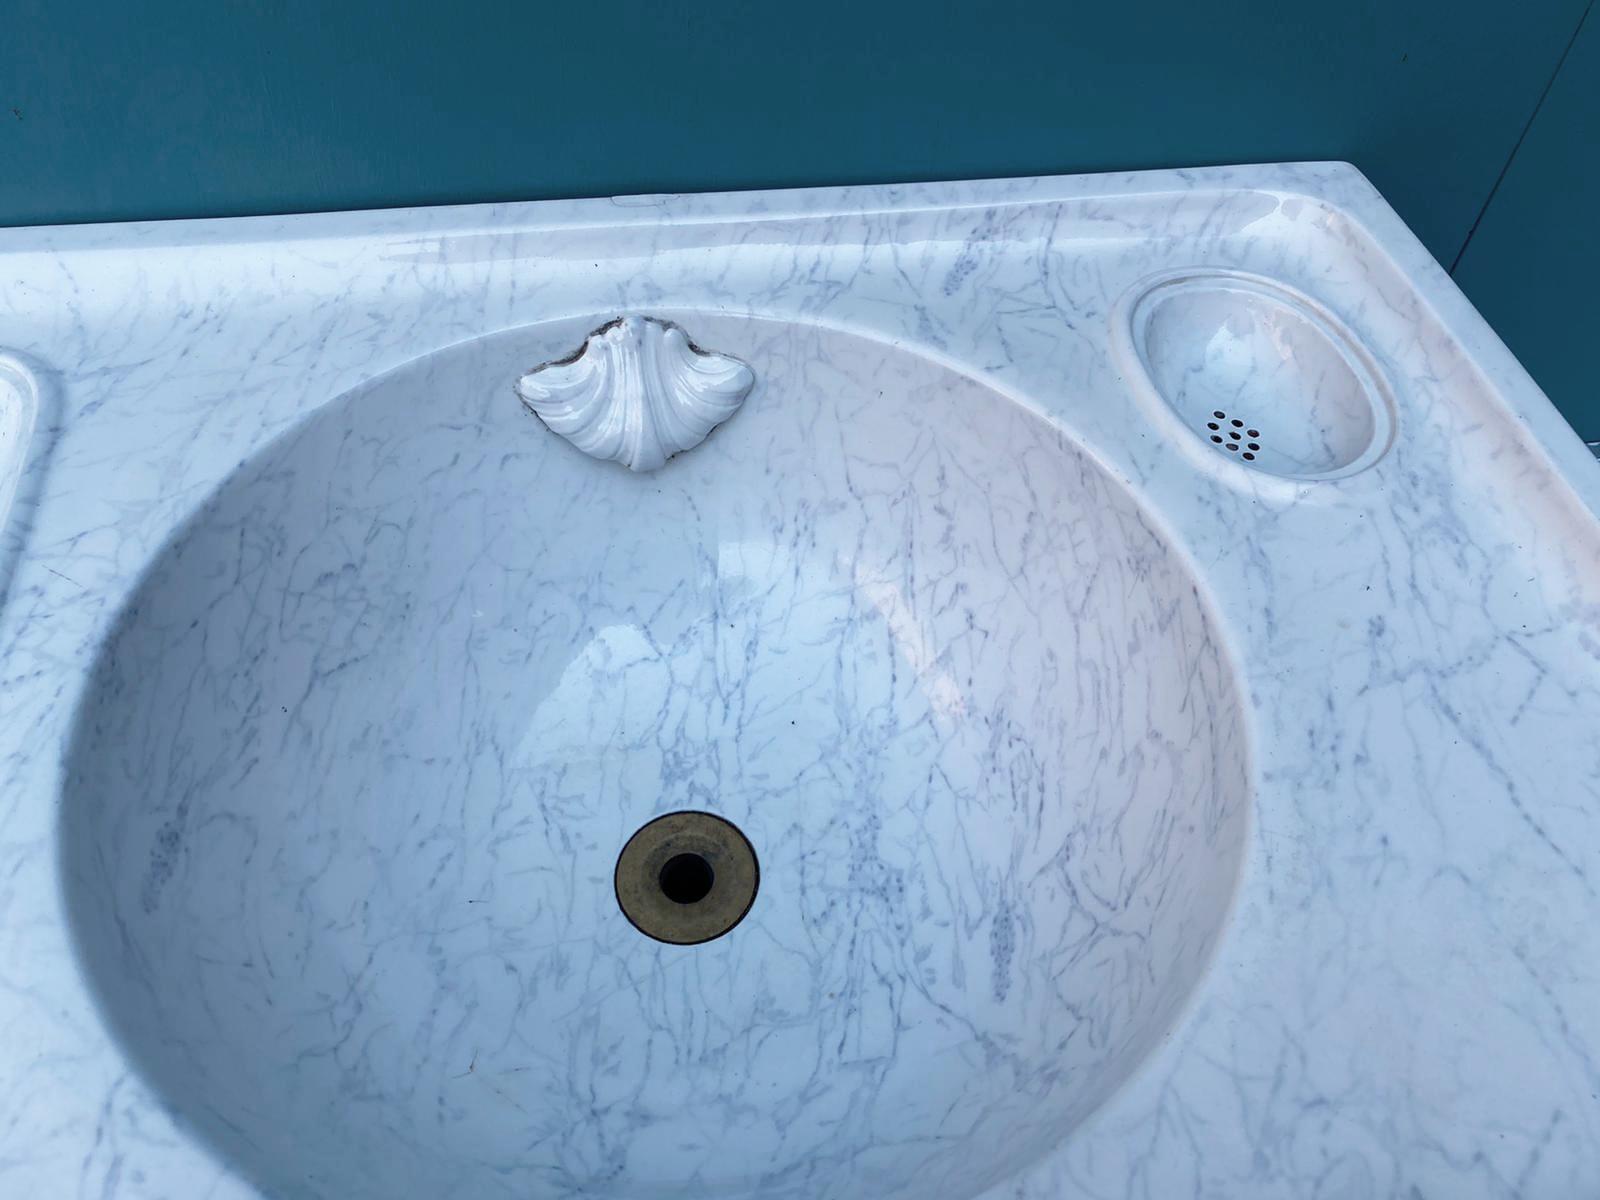 An Antique wash basin or sink with a marble effect finish, hand painted under the glaze.